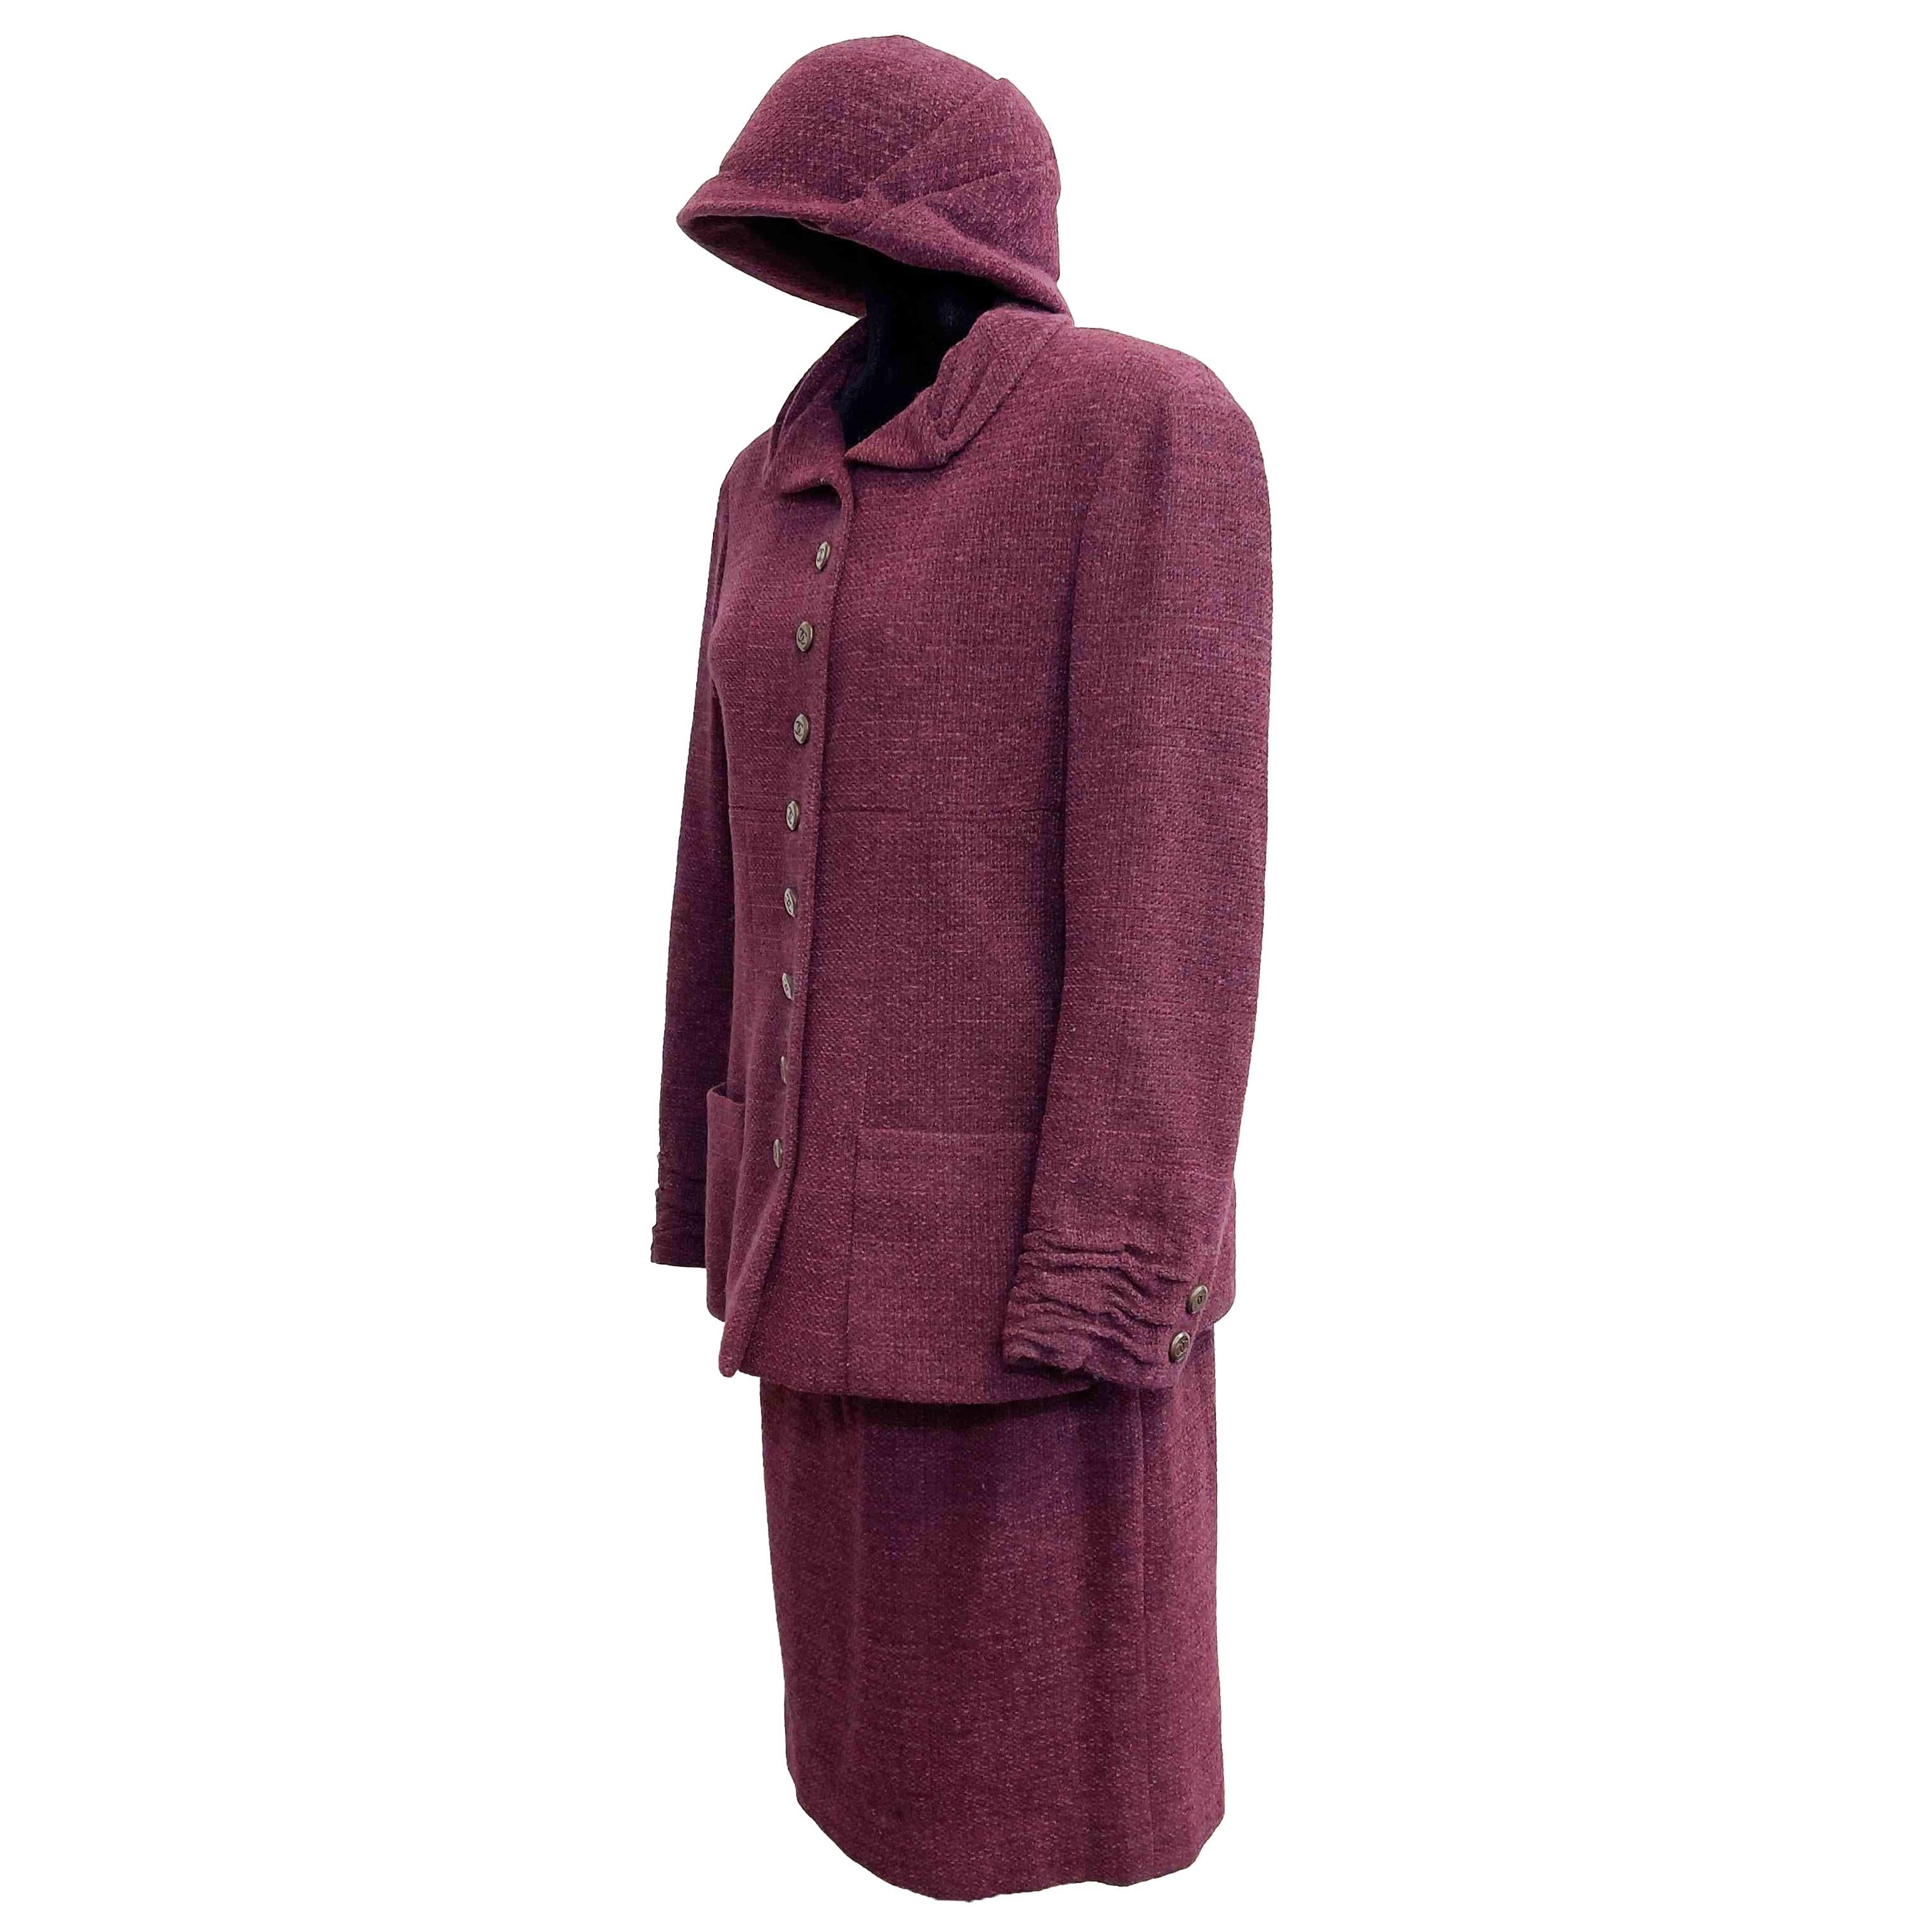 CHANEL- 98A 3 Piece Set - Boucle Hat / Jacket / Skirt - Mulberry - Size 40 US 8 For Sale 4